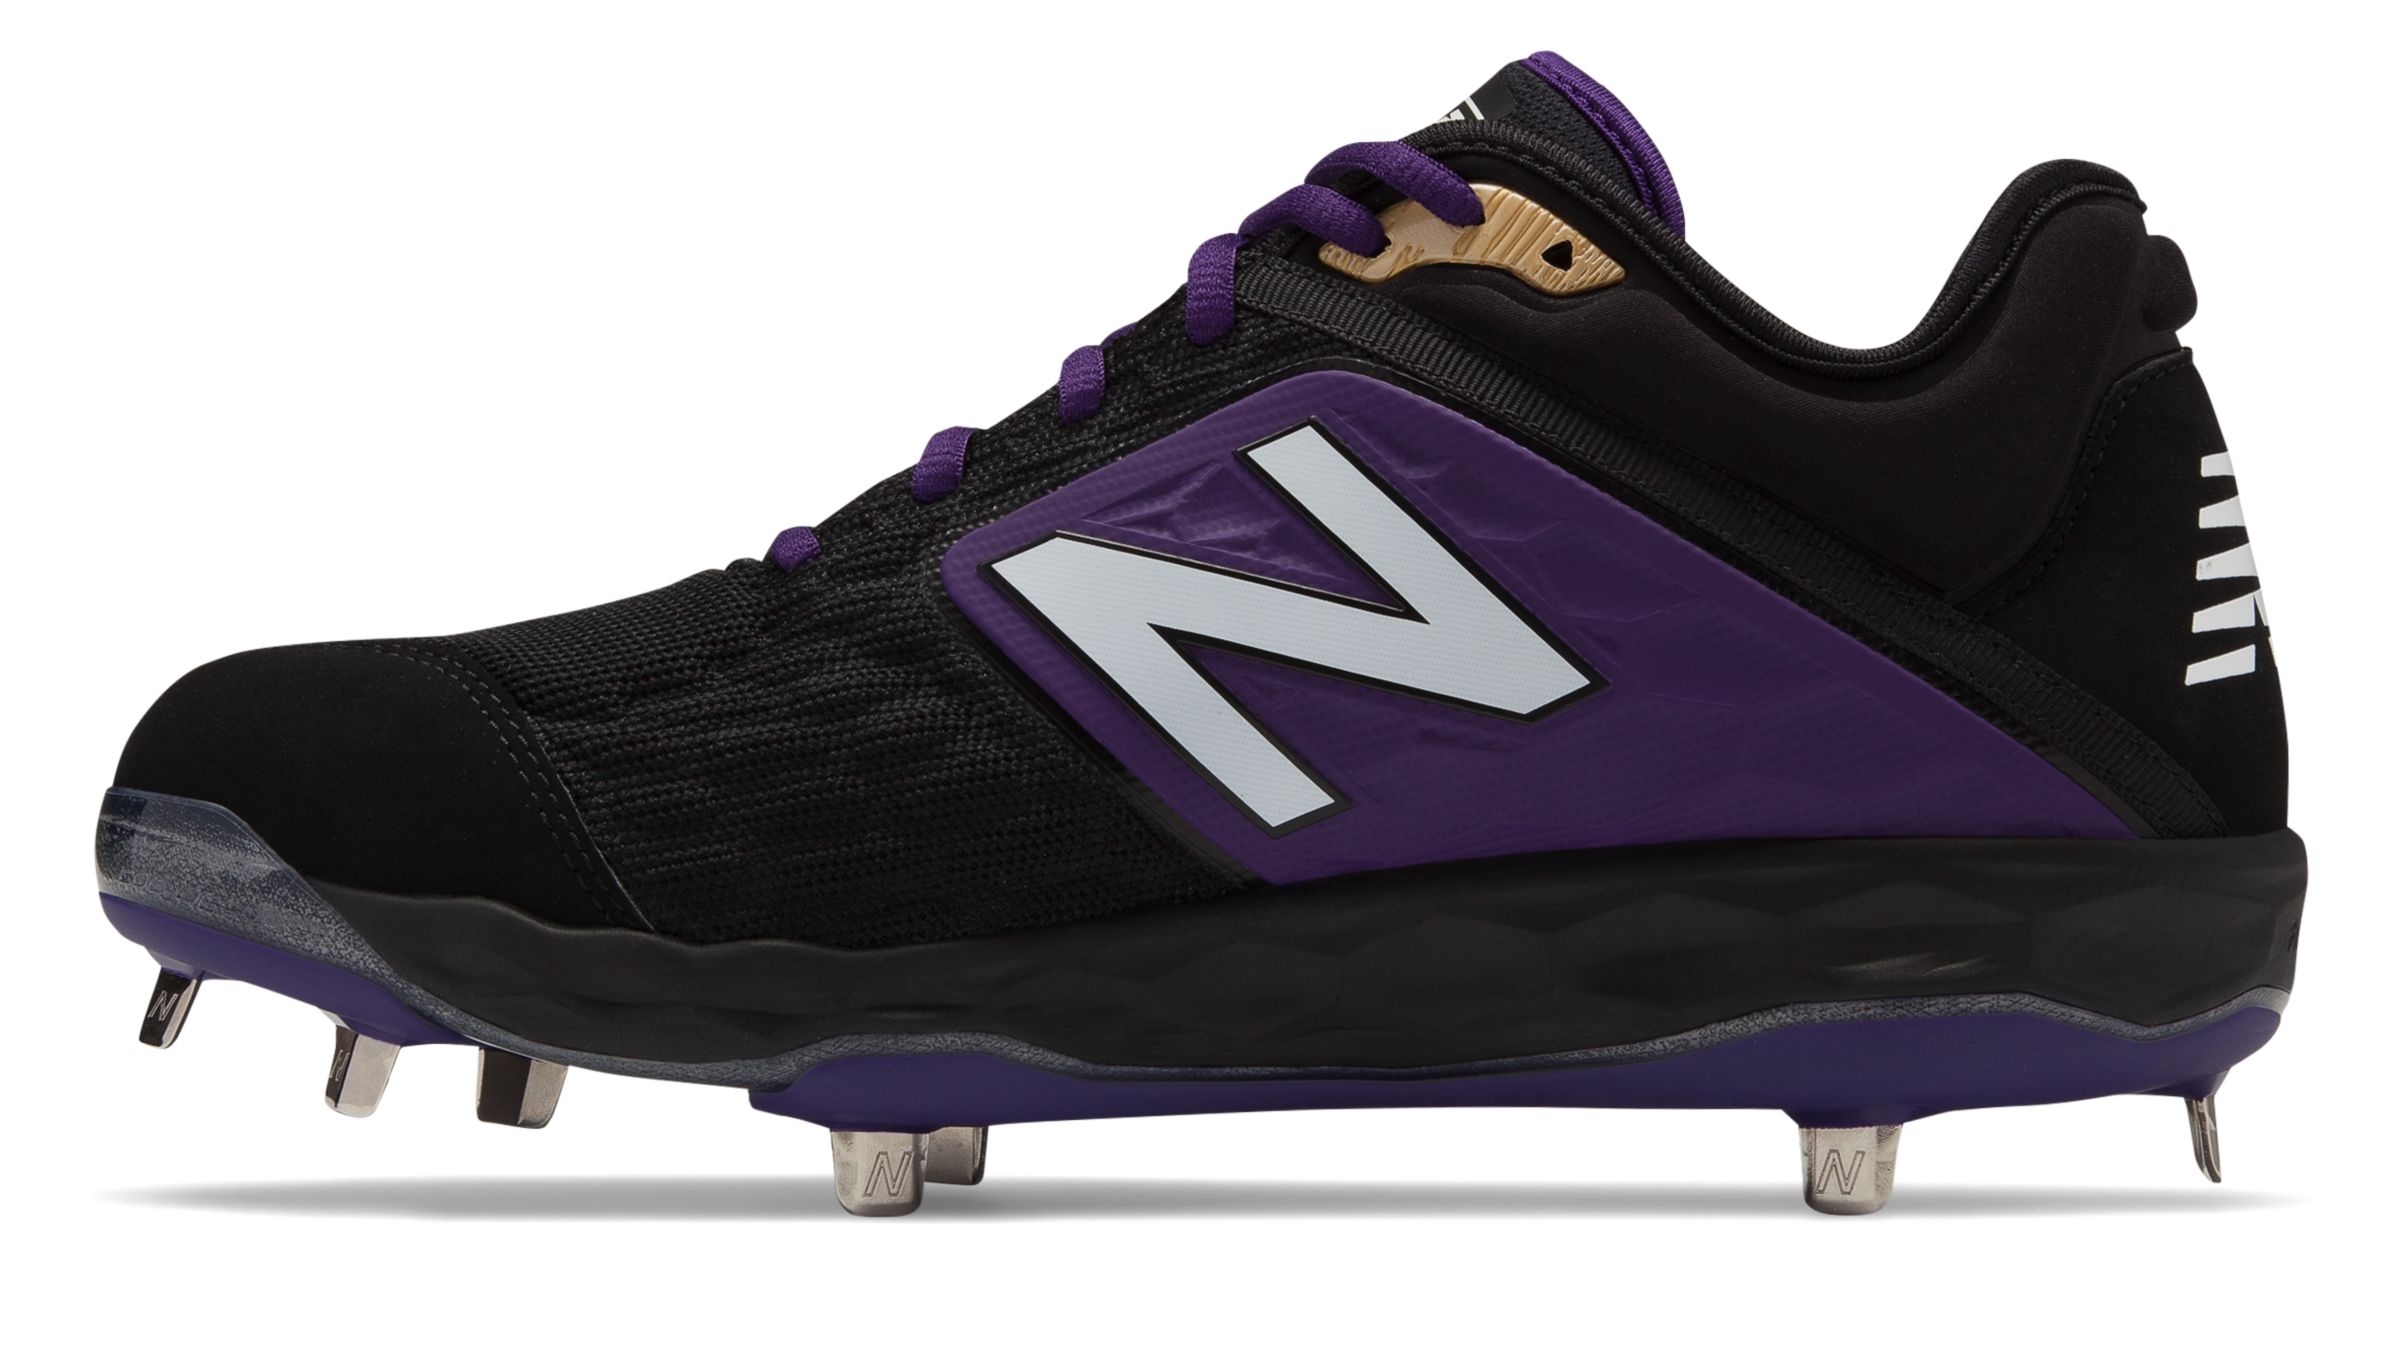 New Balance Low-Cut 3000v4 Metal Baseball Cleat Mens Shoes Black with Purple - image 2 of 4